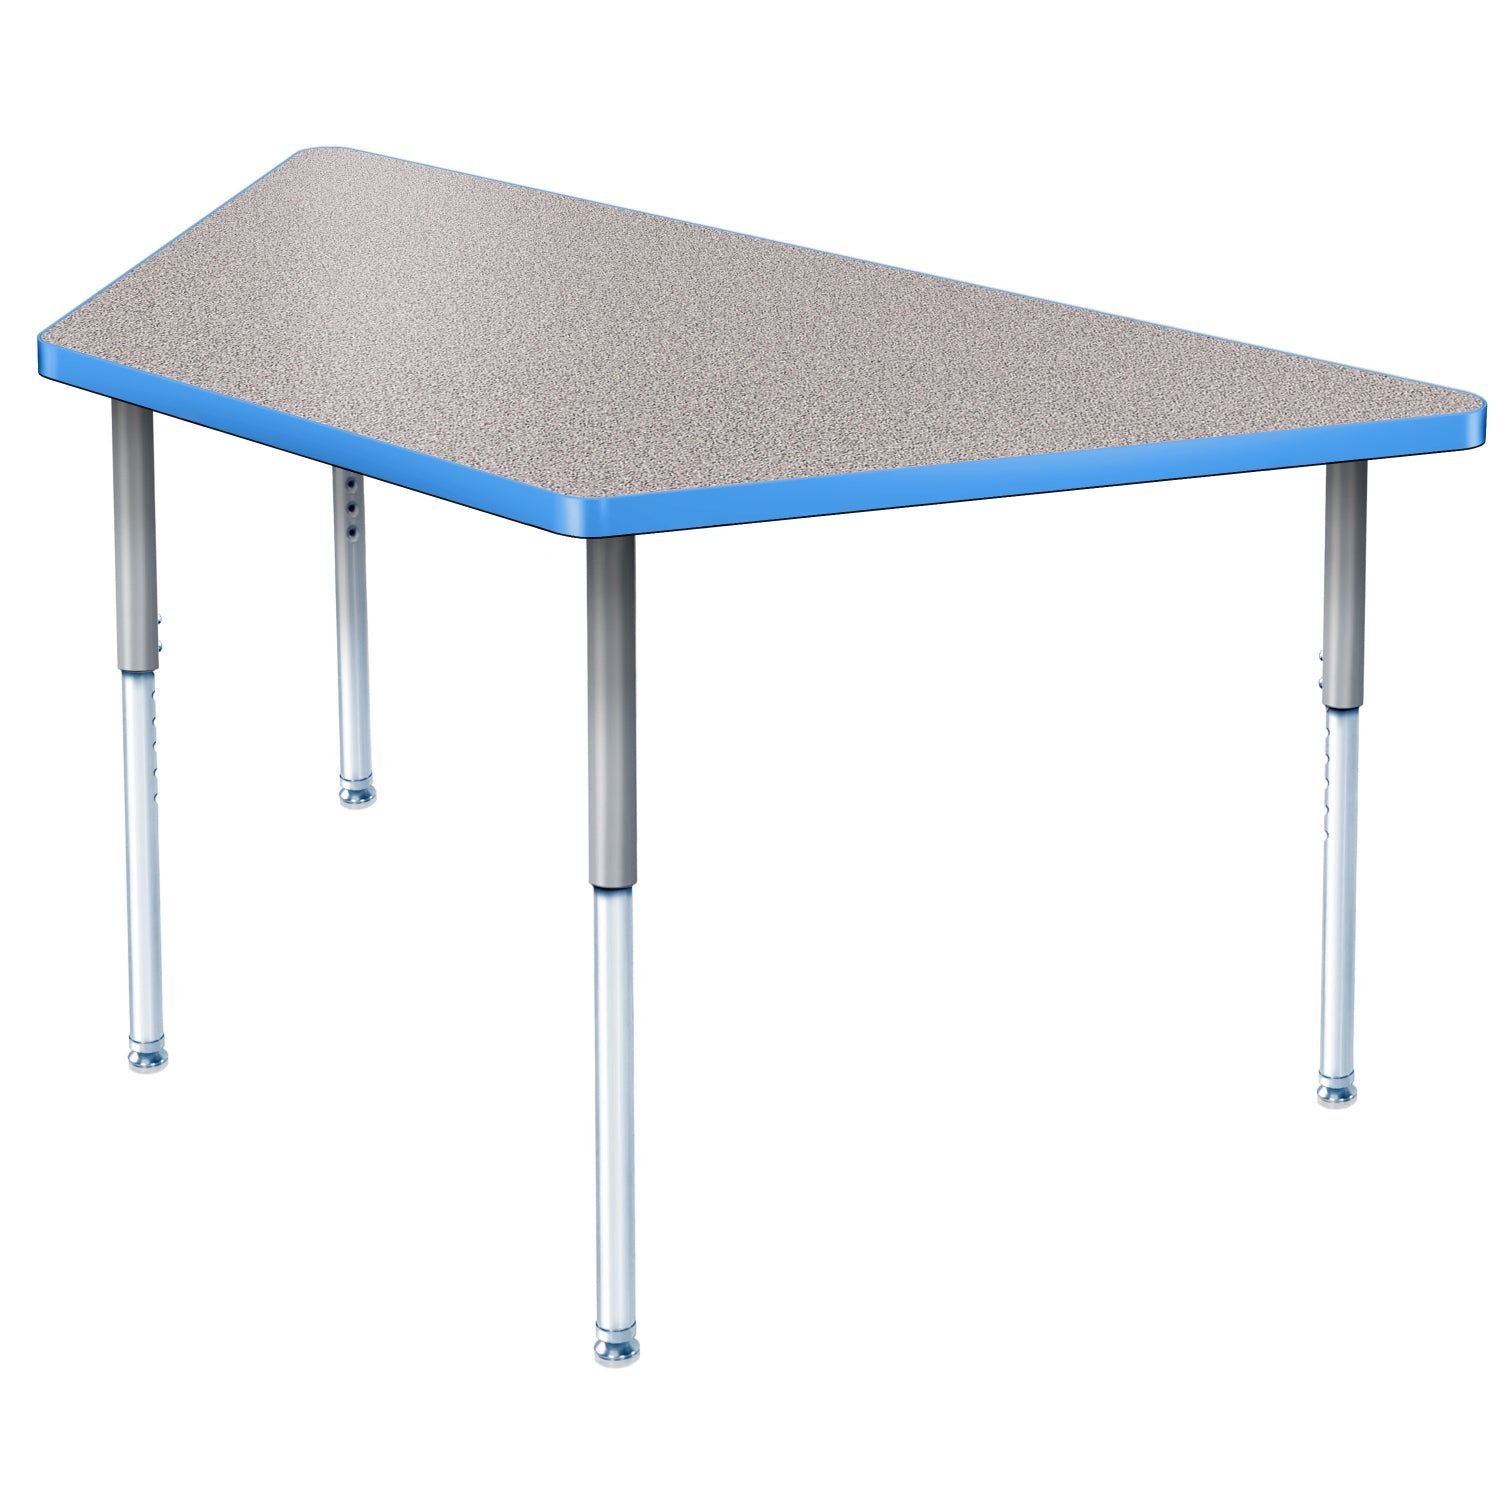 Modern Classic Series 24 x 24 x 48" Trapezoid Activity Table with High Pressure Laminate Top, Adjustable Height Legs